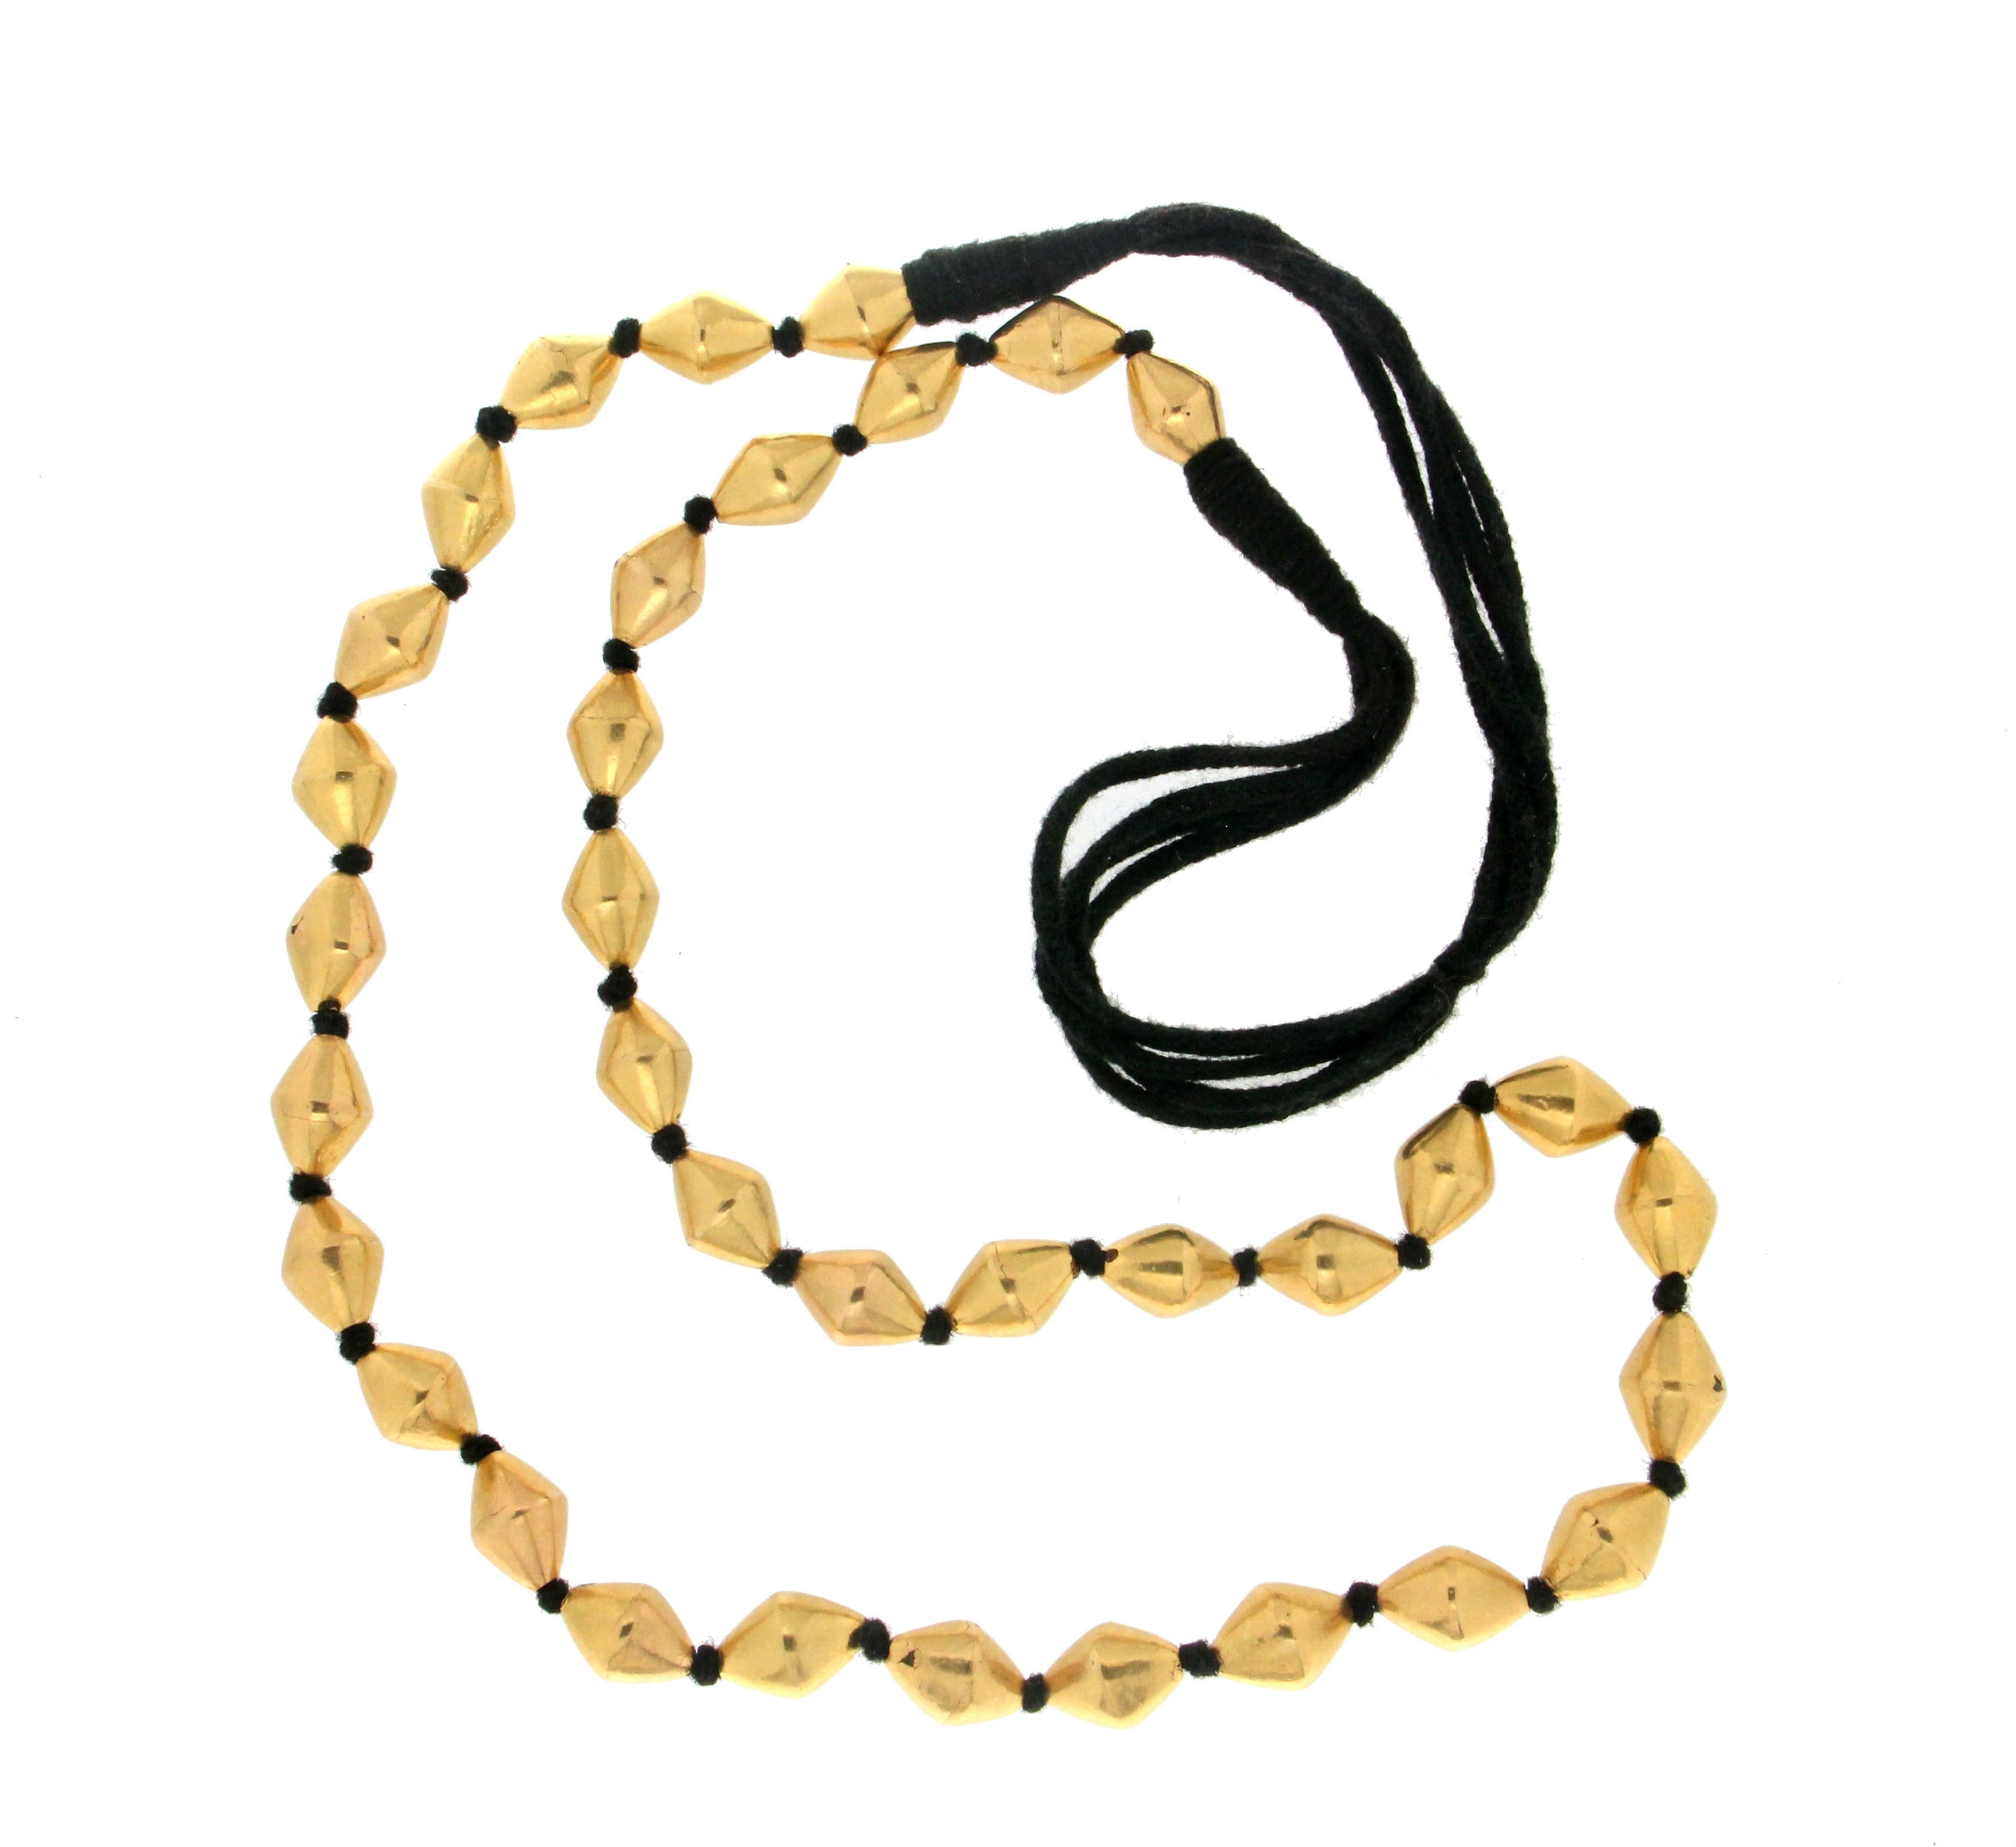 22 karat Yellow Gold Rope Necklace, The Gold Is Only Outside, Inside There Is Wax.

Necklace only the gold weight 11 Grams
Necklaces Total Weight 25.80 Grams
Length is 64
Each barrel is 1 cm length  and 0.60 width  